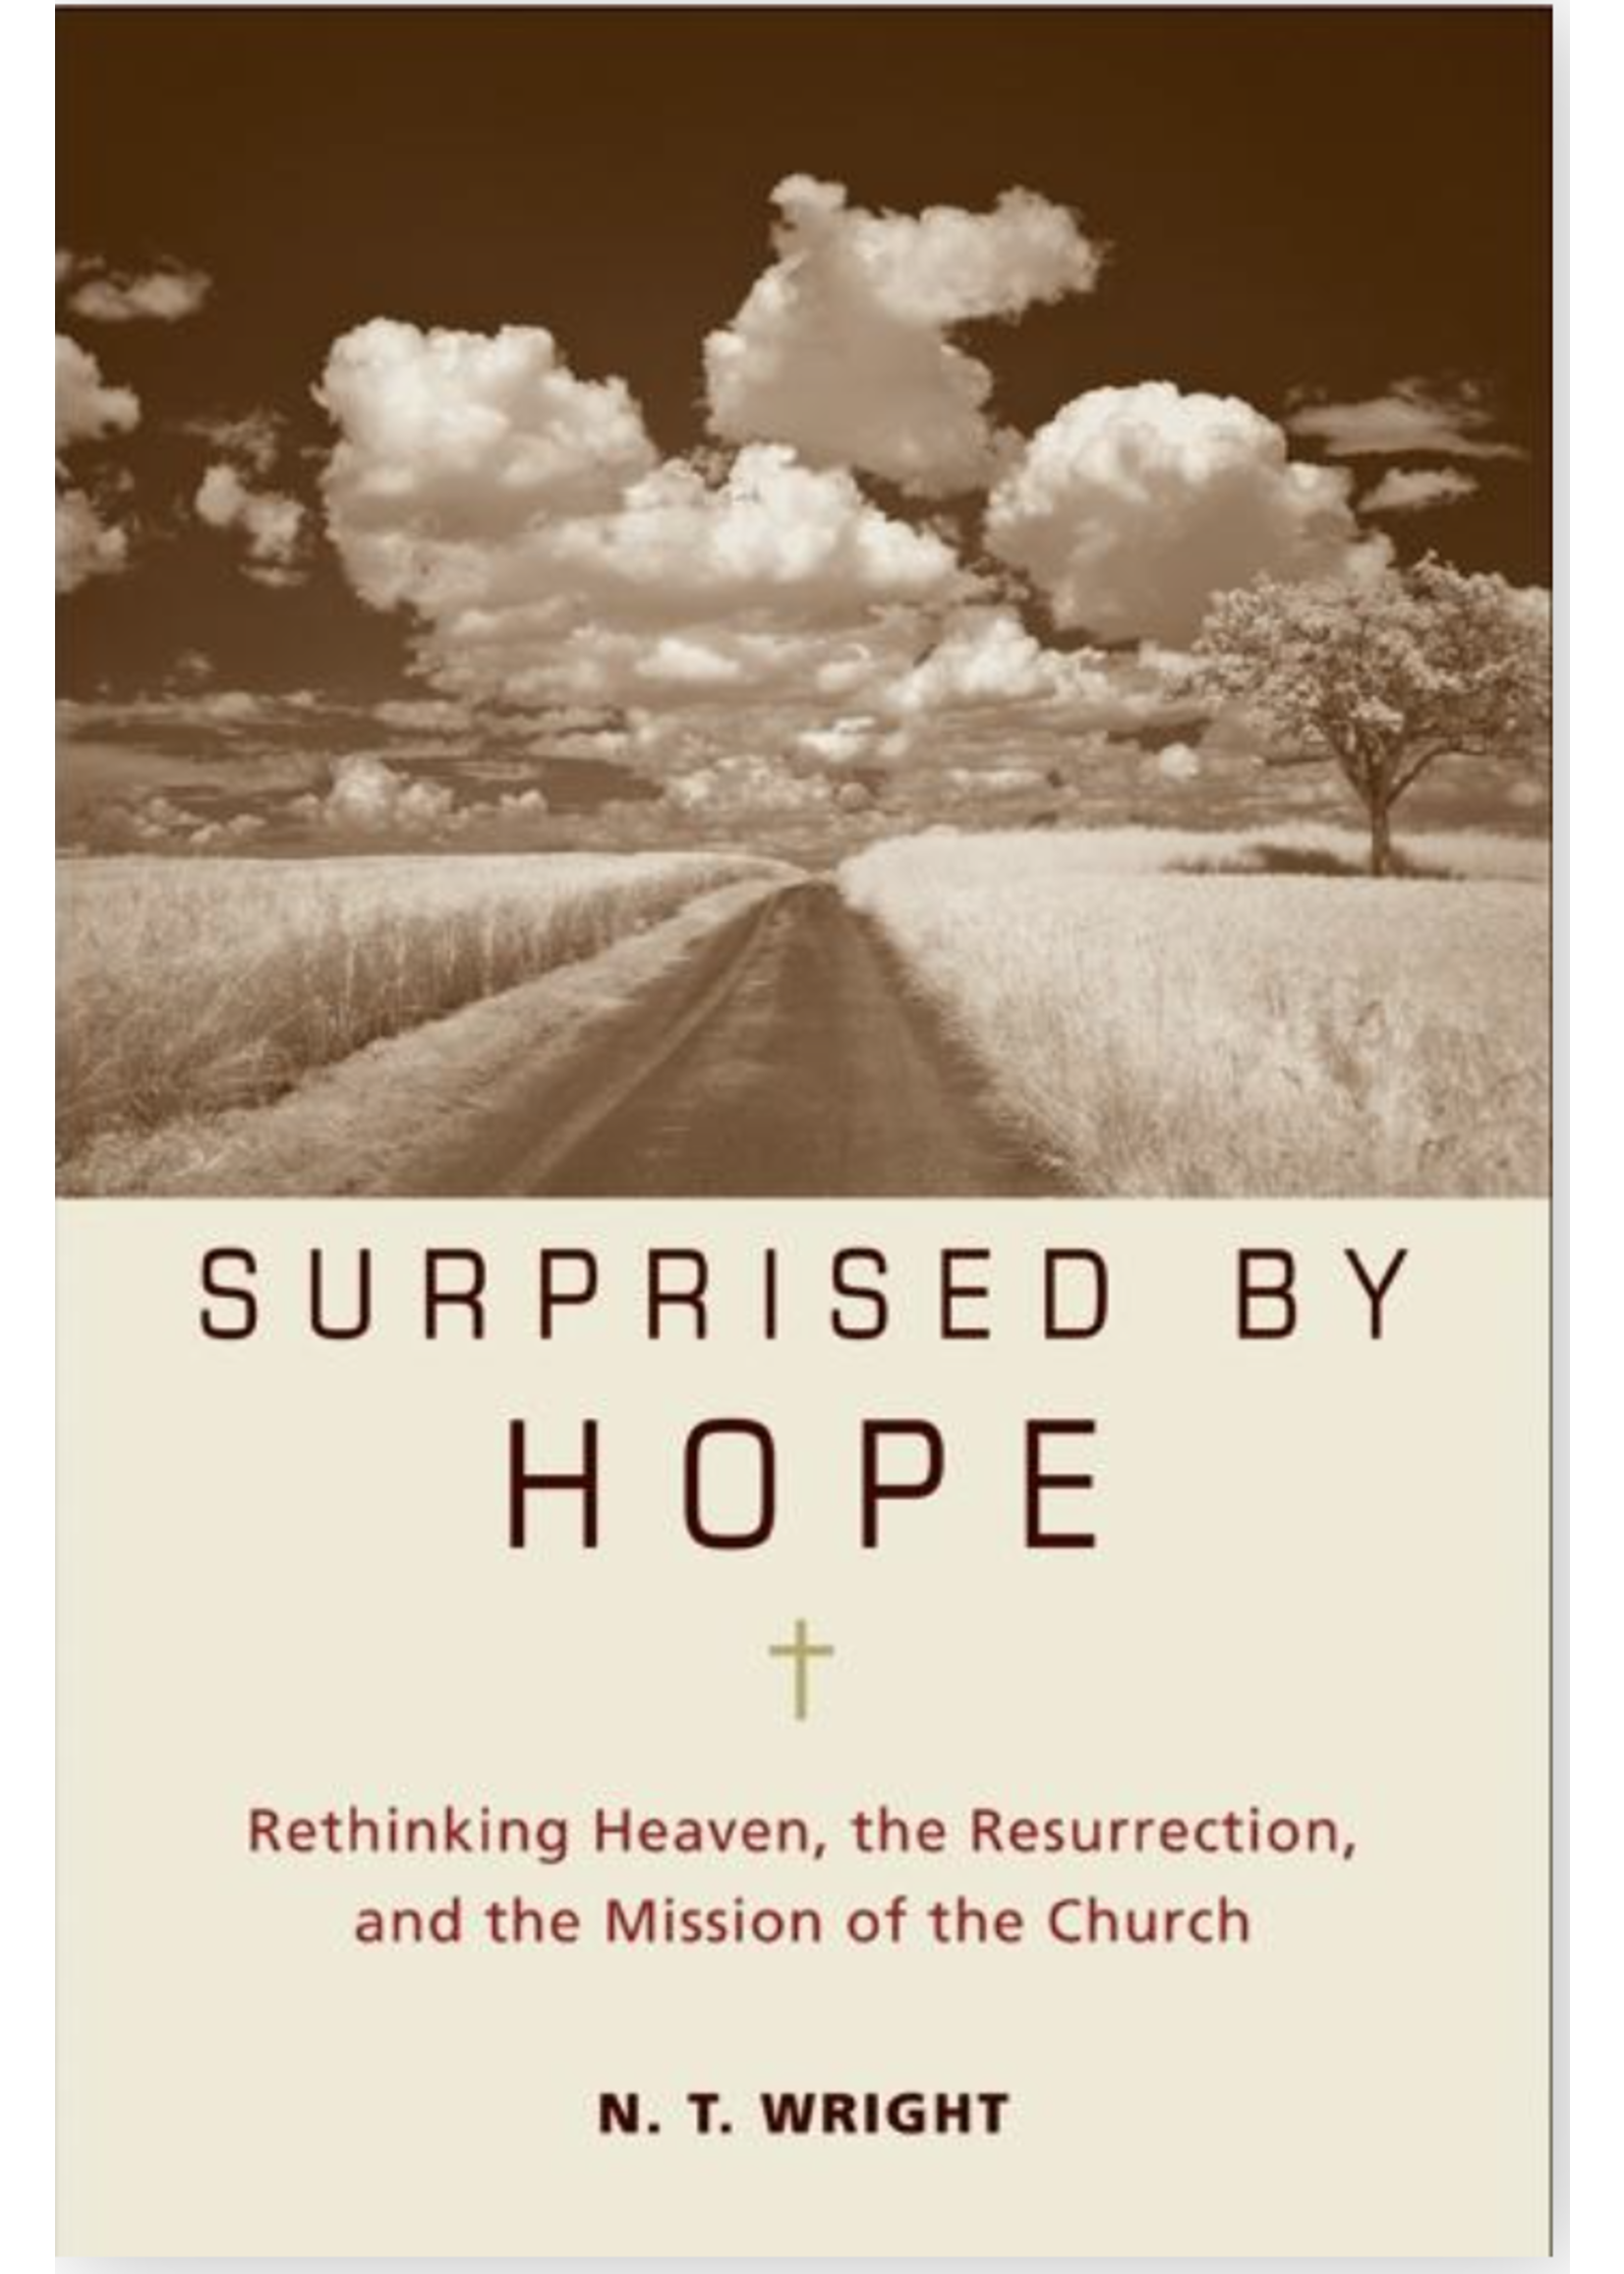 WRIGHT, N. T. Surprised by Hope: Rethinking Heaven, the Resurrection, and the Mission of the Church